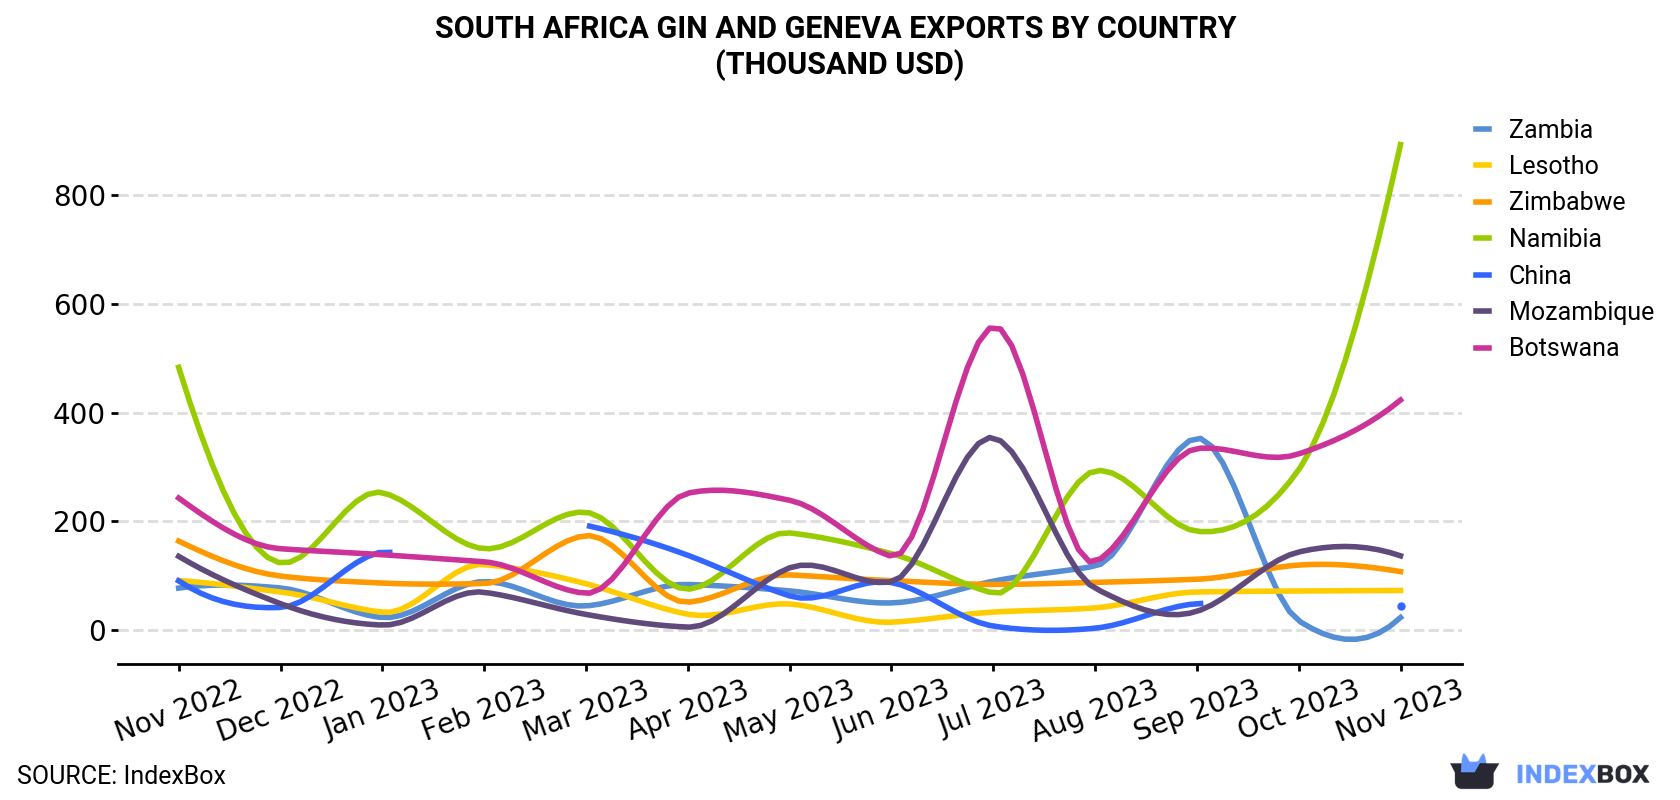 South Africa Gin And Geneva Exports By Country (Thousand USD)